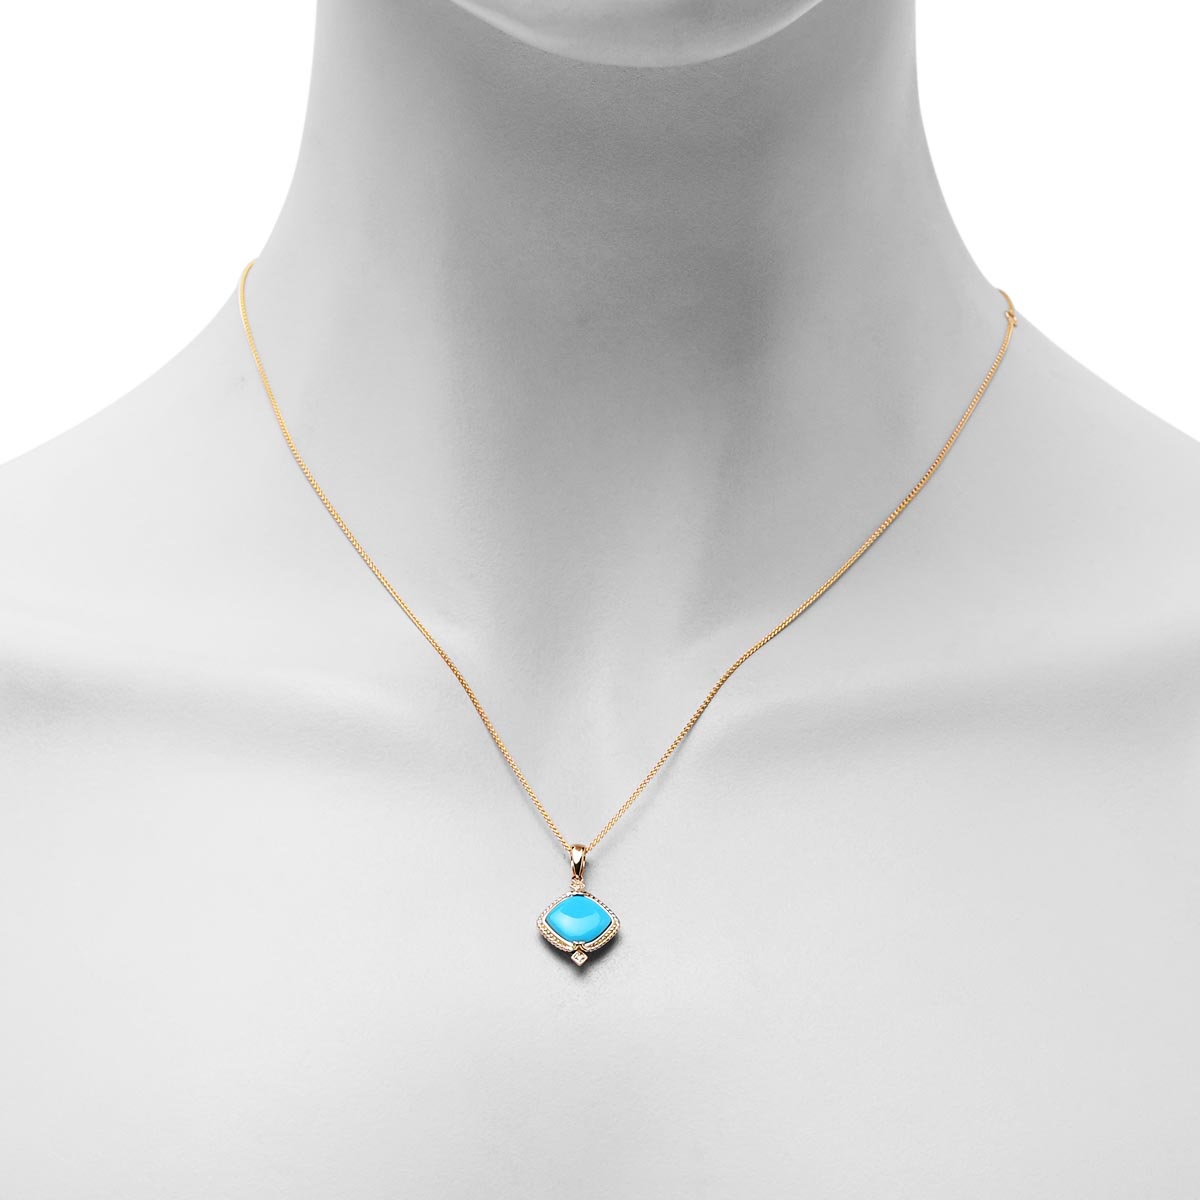 Cushion Turquoise Necklace in 14kt Yellow Gold with Diamonds (1/100ct tw)